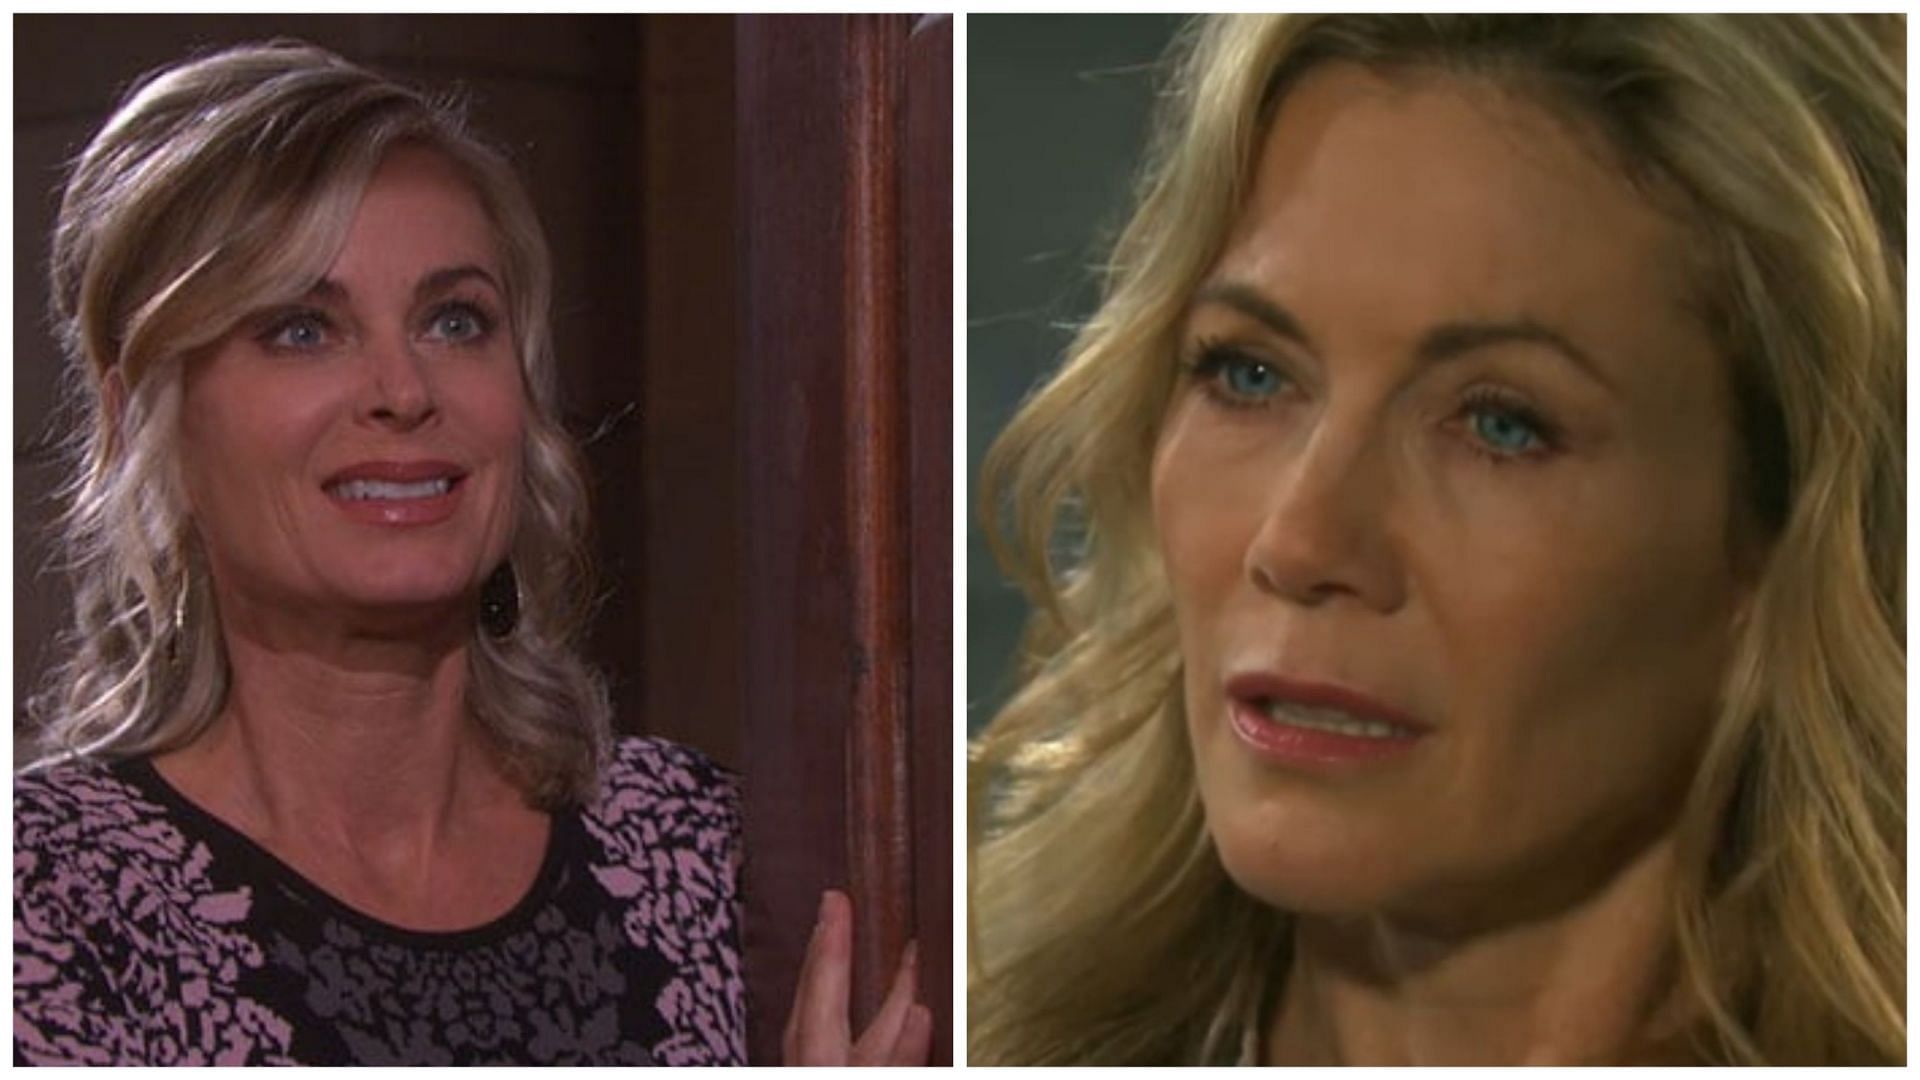 Eileen Davidson and Stacy Haiduk as Kristen DiMera on Days of our Lives (Image via The BurBank Studios)